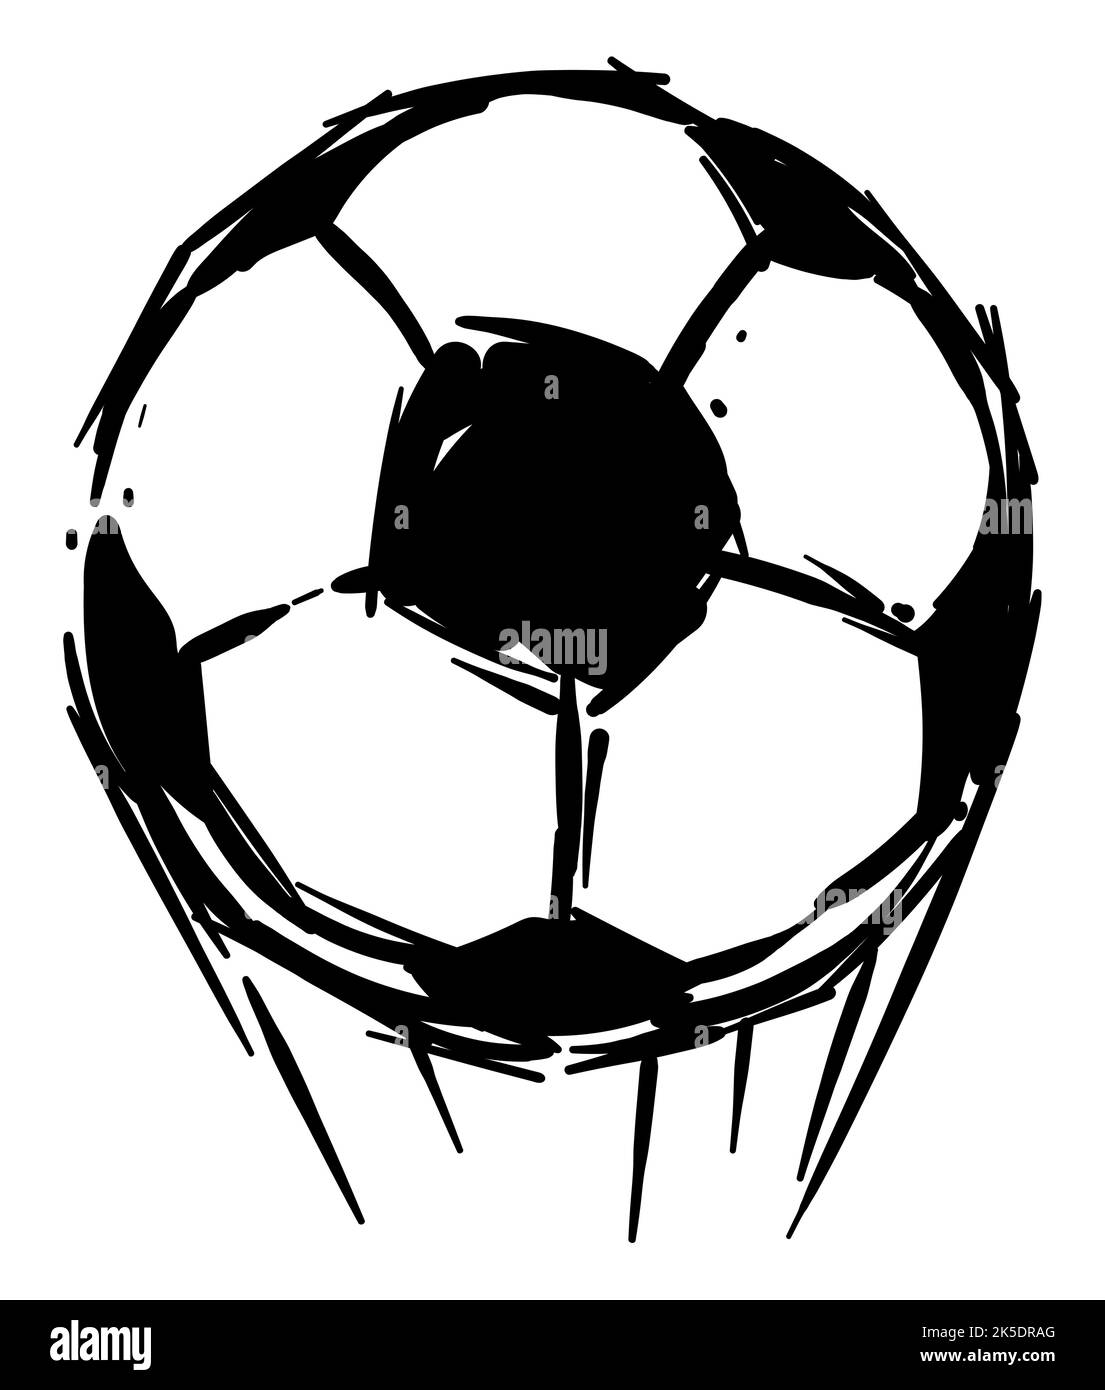 Fast soccer ball with speed lines thrown to the top. Design in hand drawn style. Stock Vector